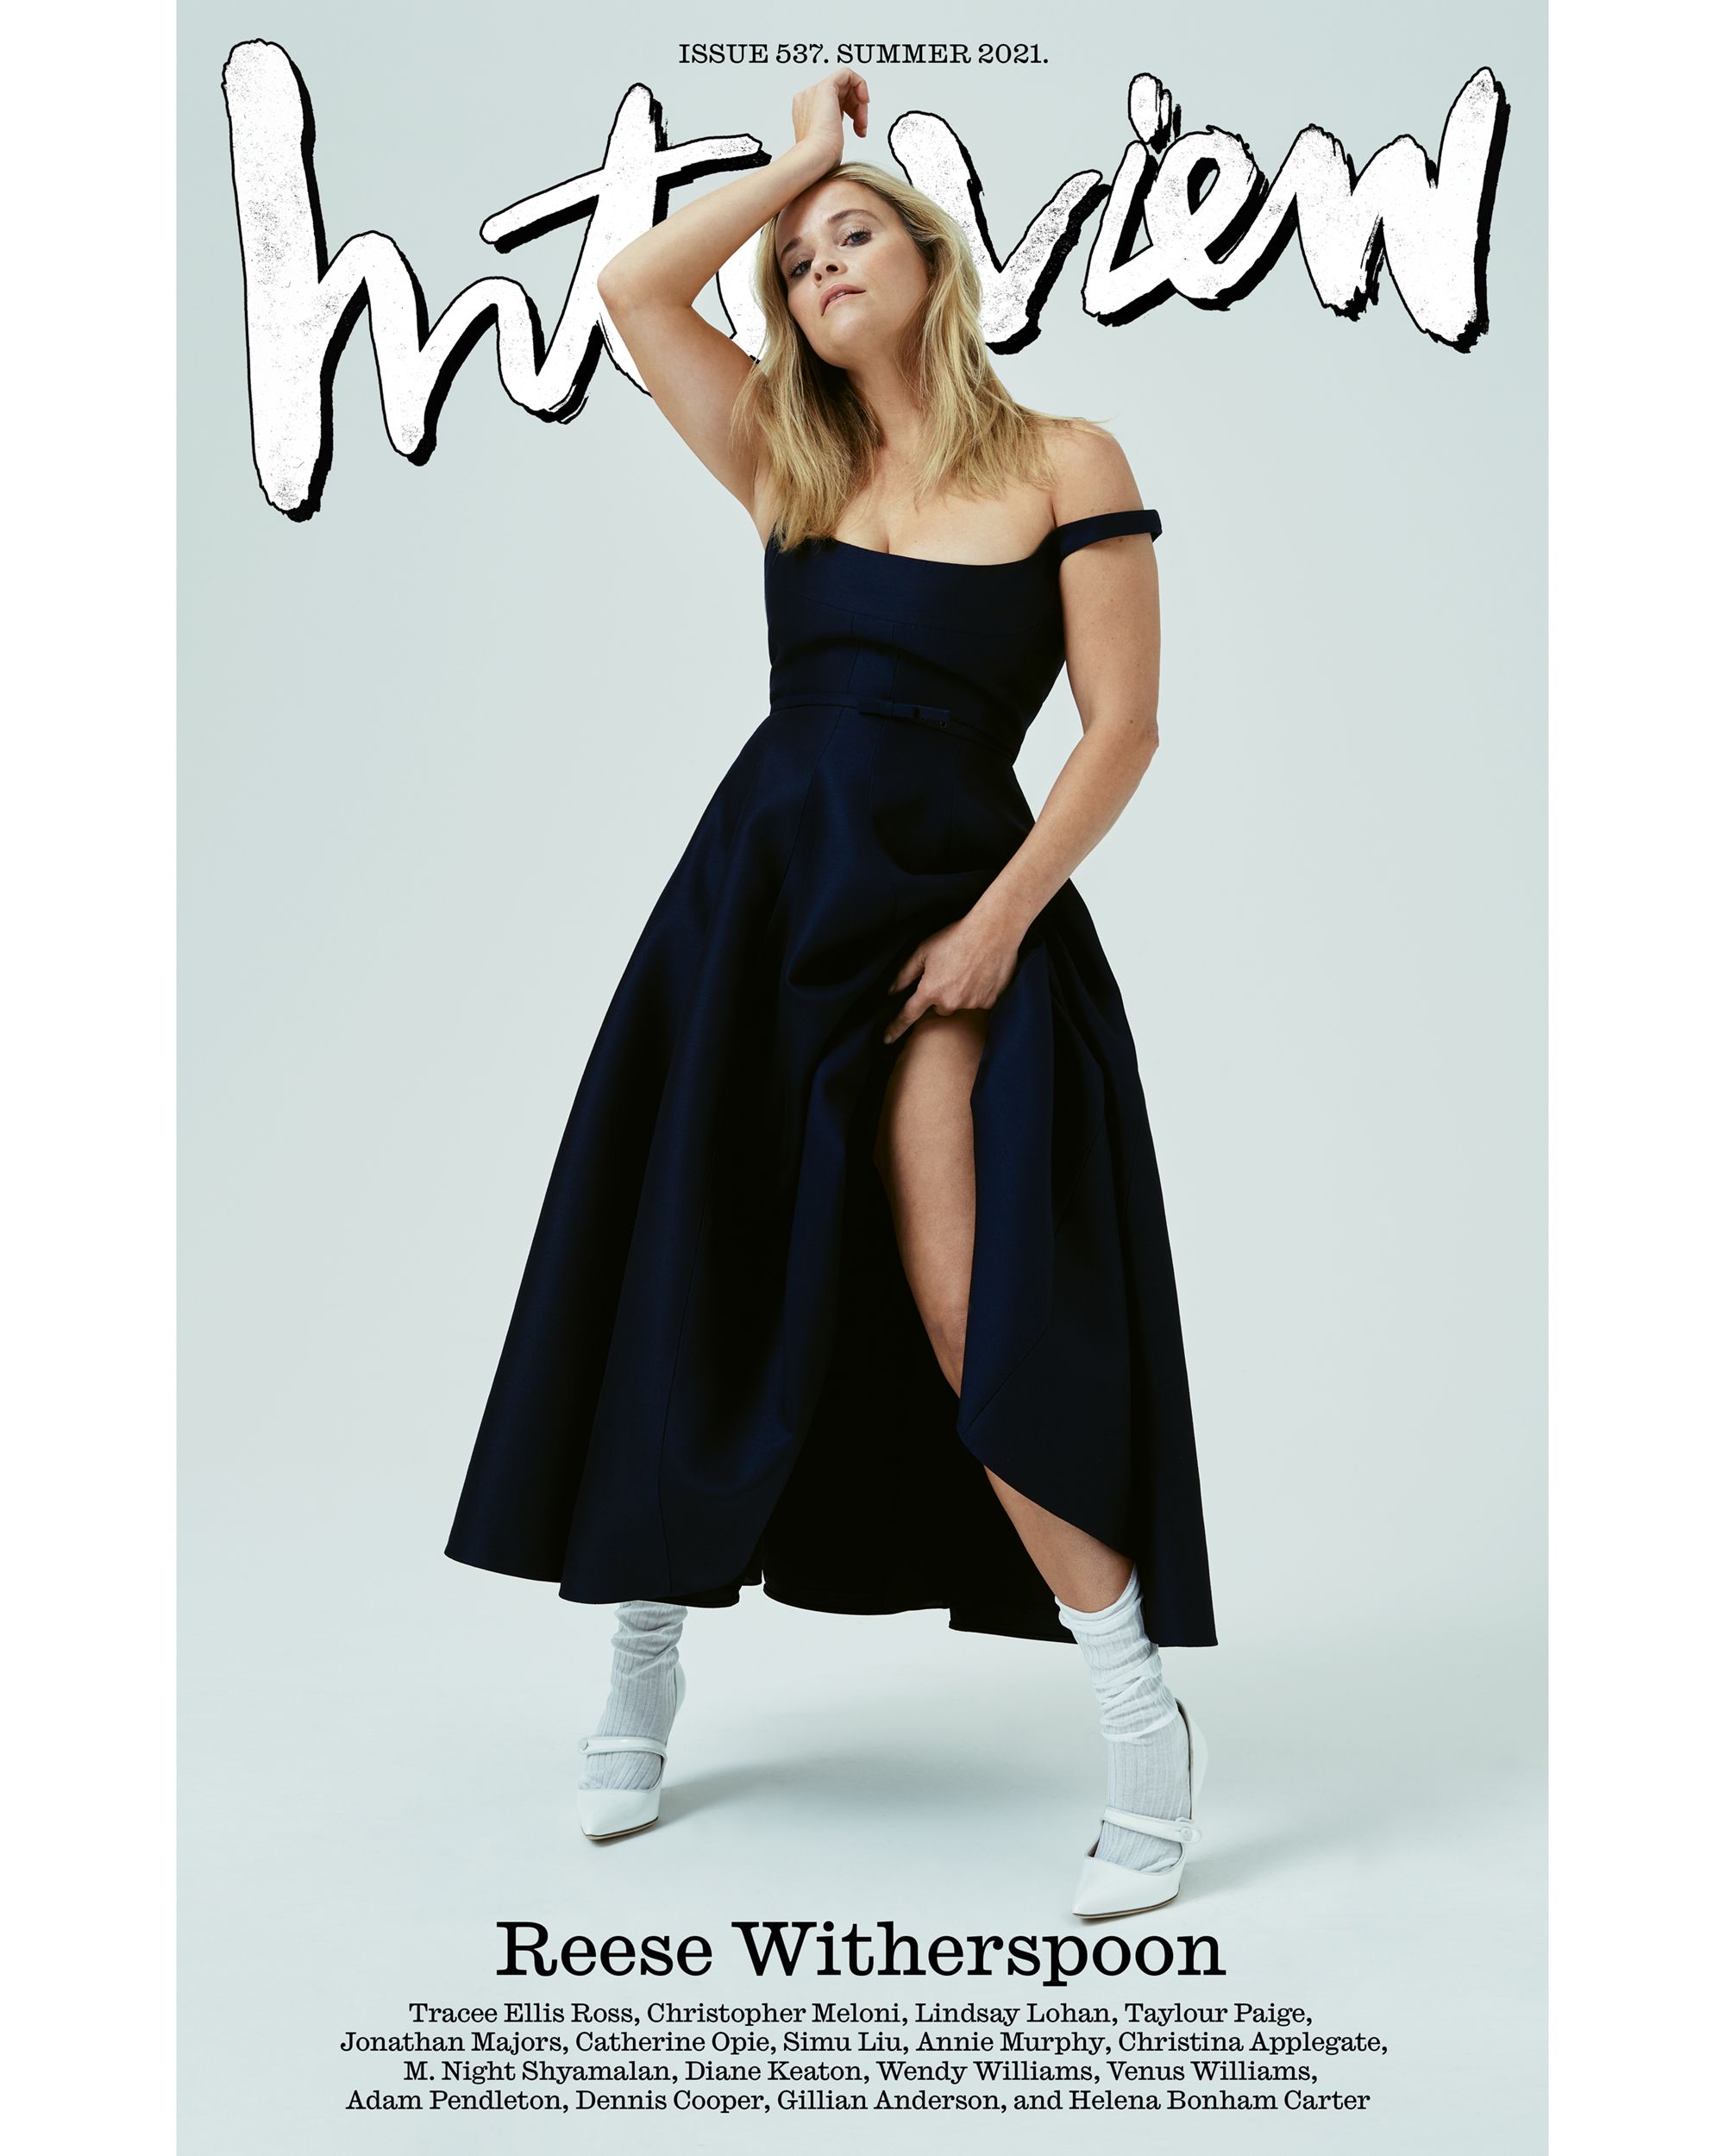 august 2023 Harper Bazaar Reese Witherspoon cover " The